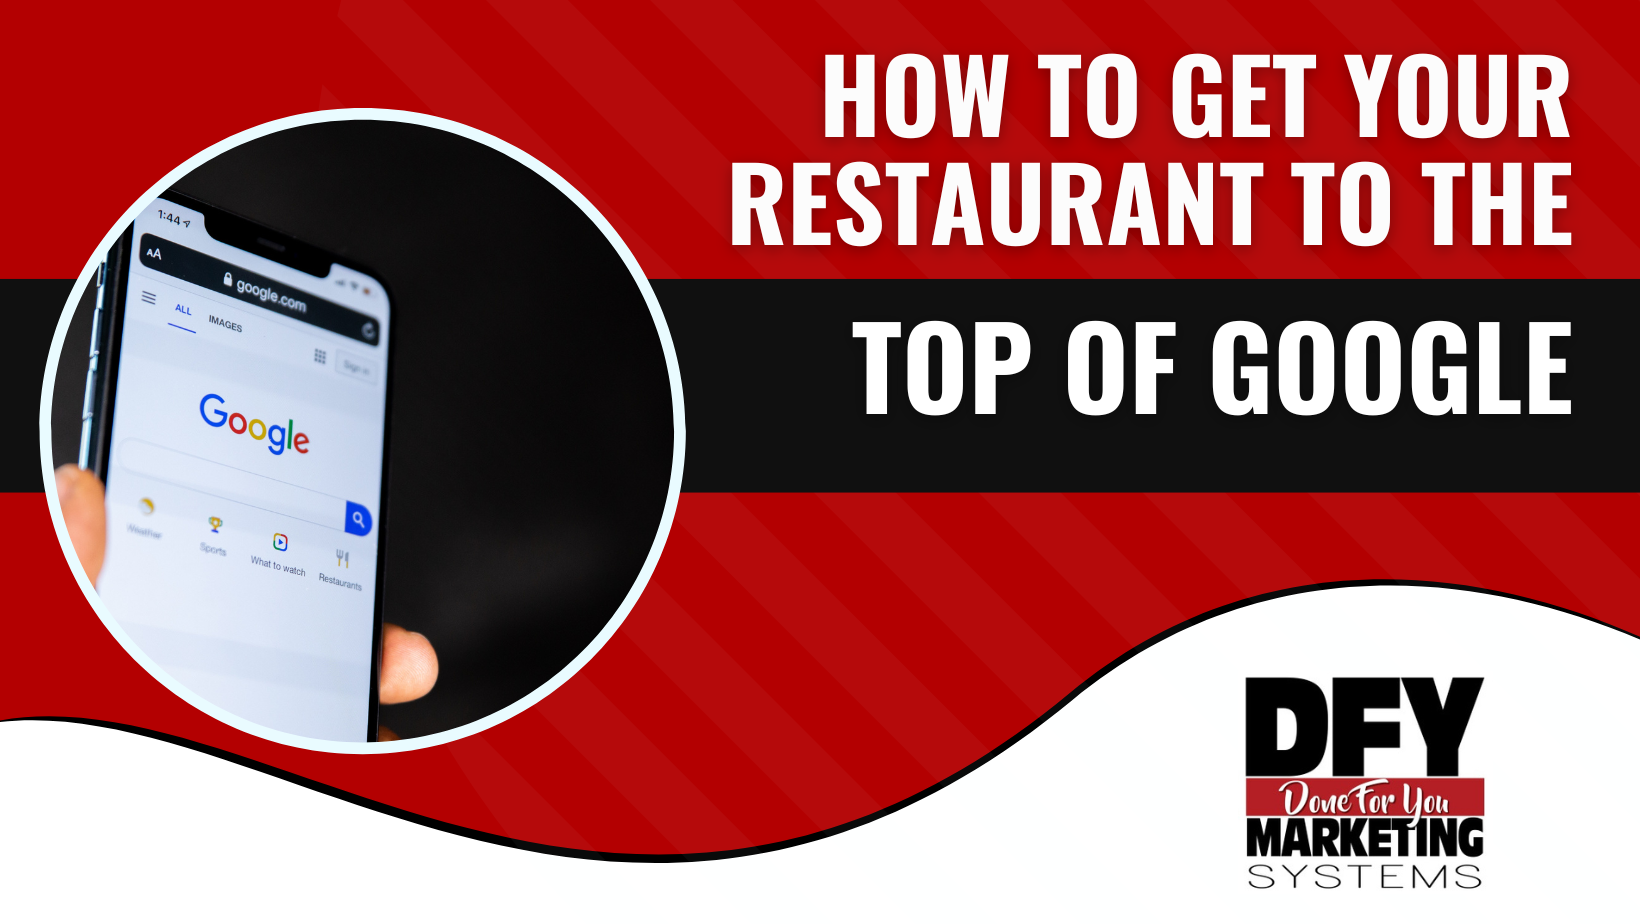 How To Get Your Restaurant To The Top Of Google